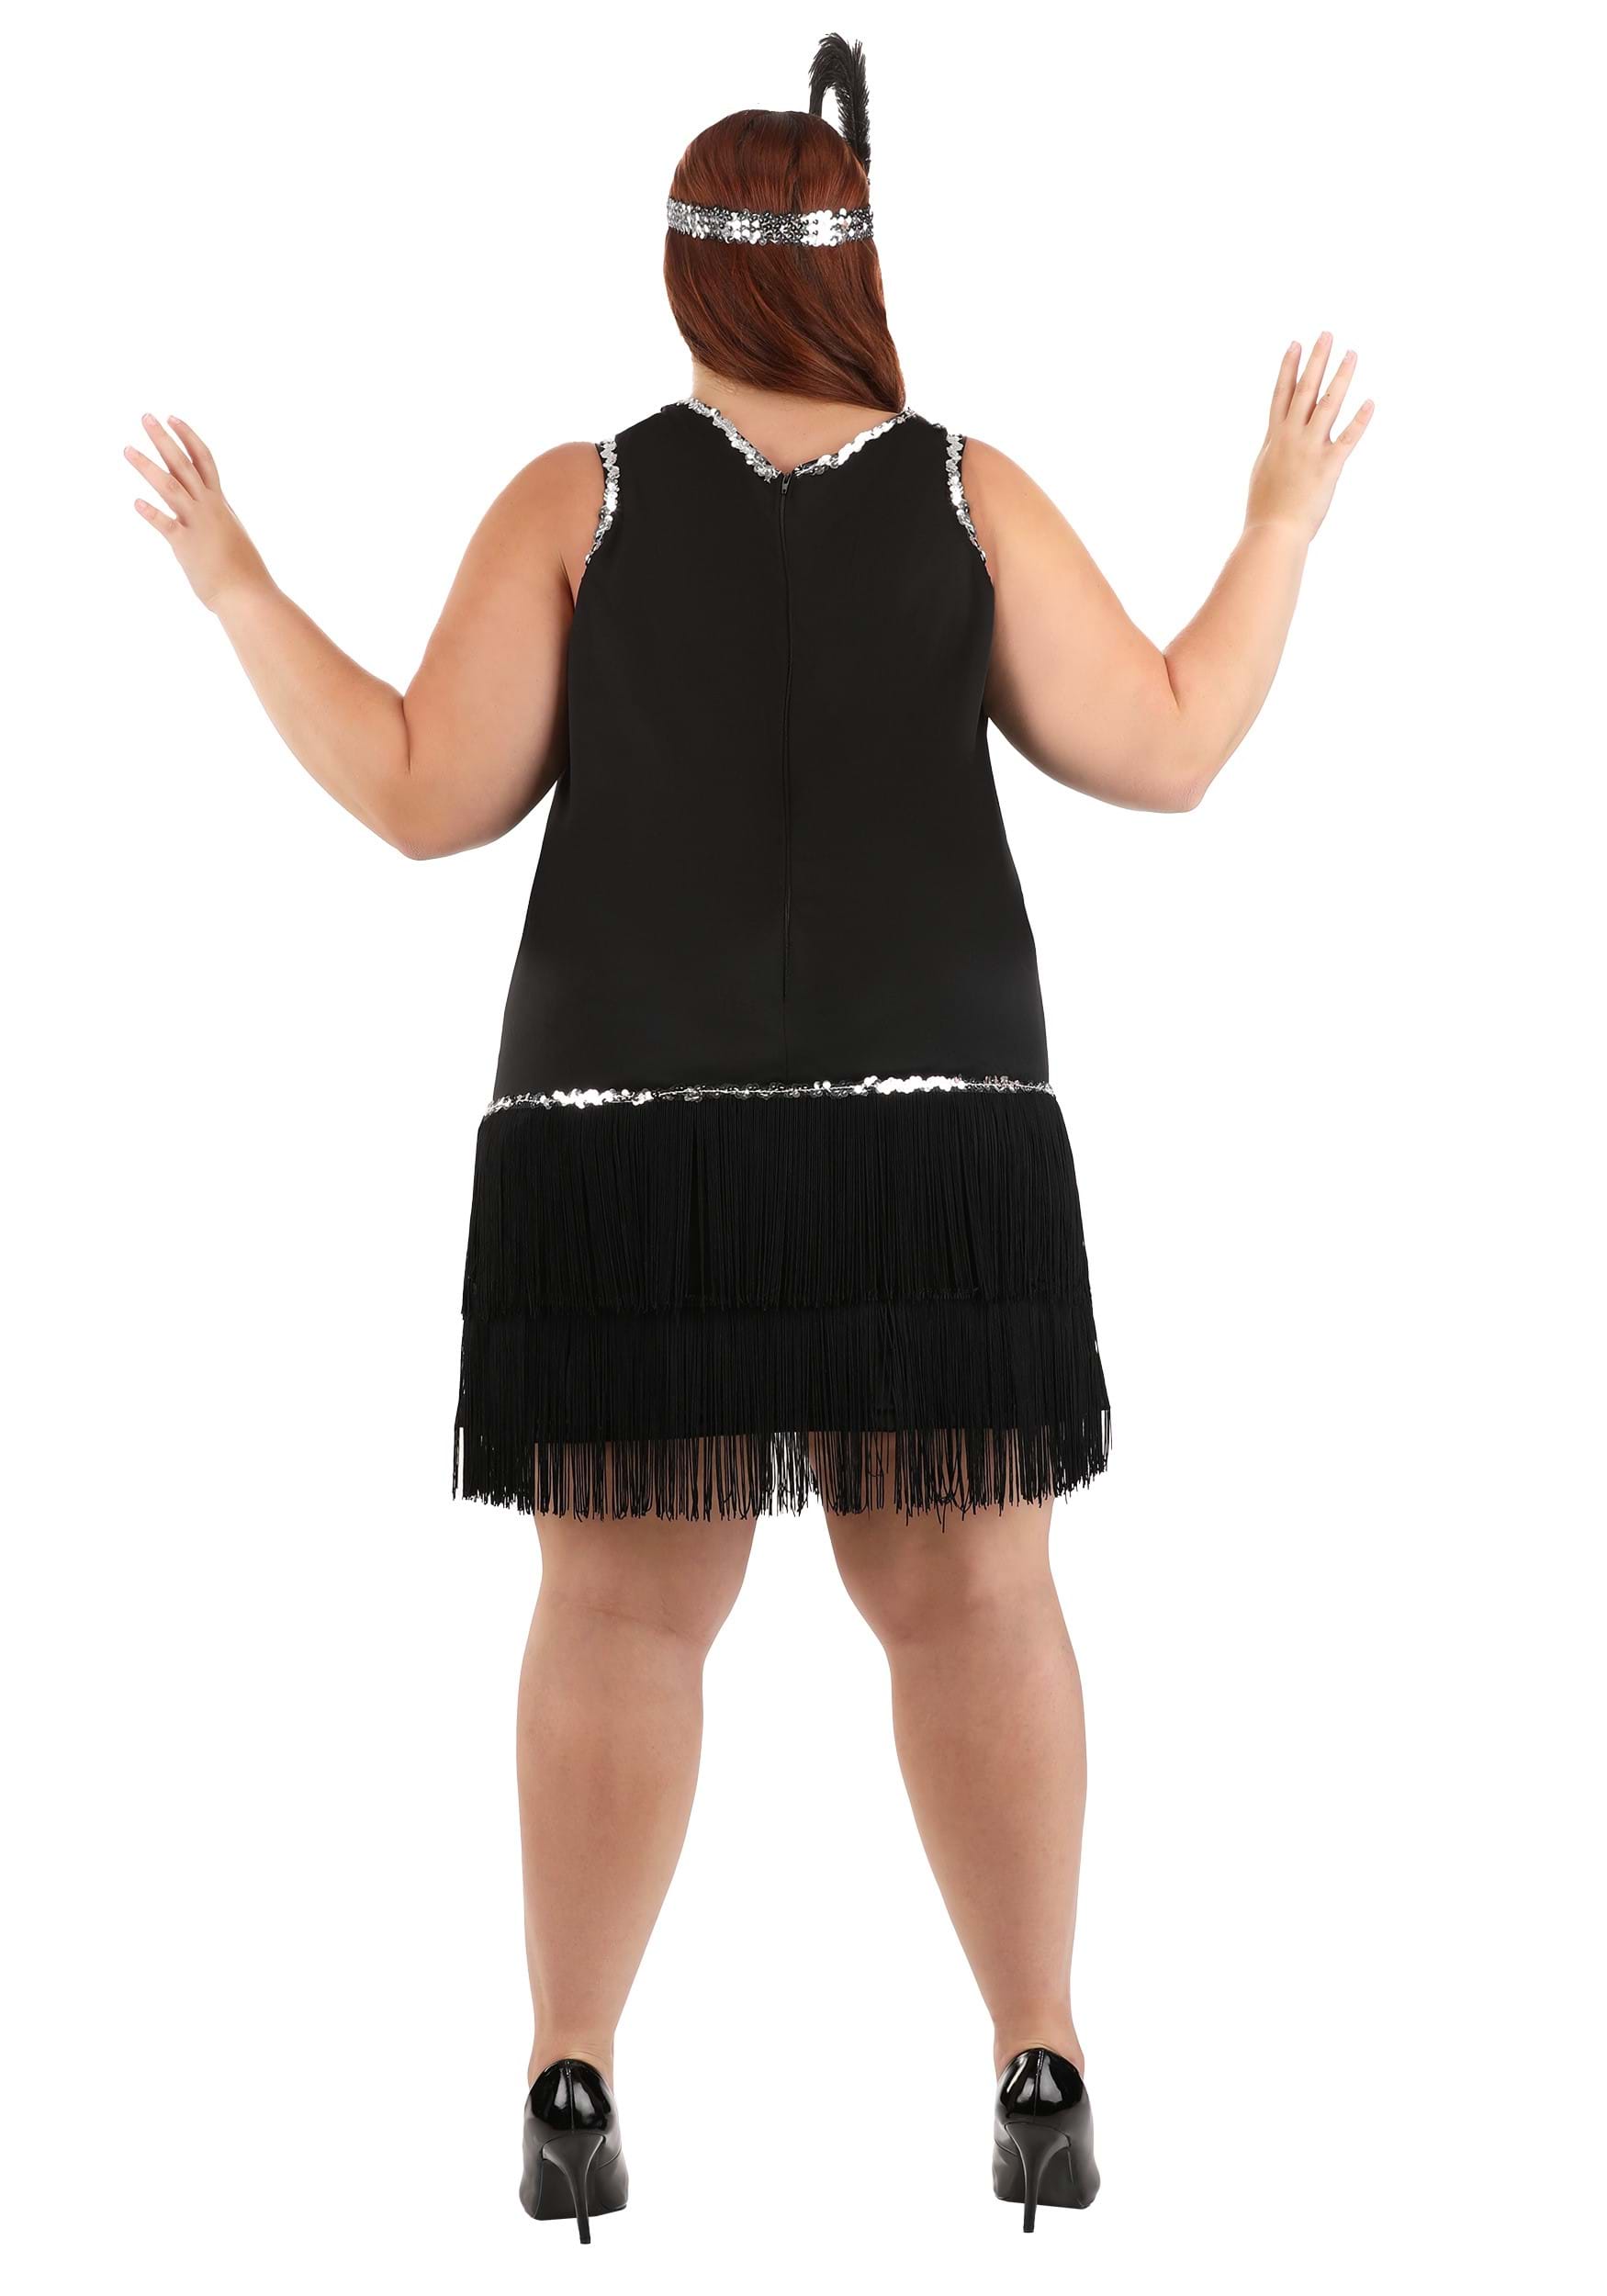 Plus Size Onyx Flapper Costume For Women